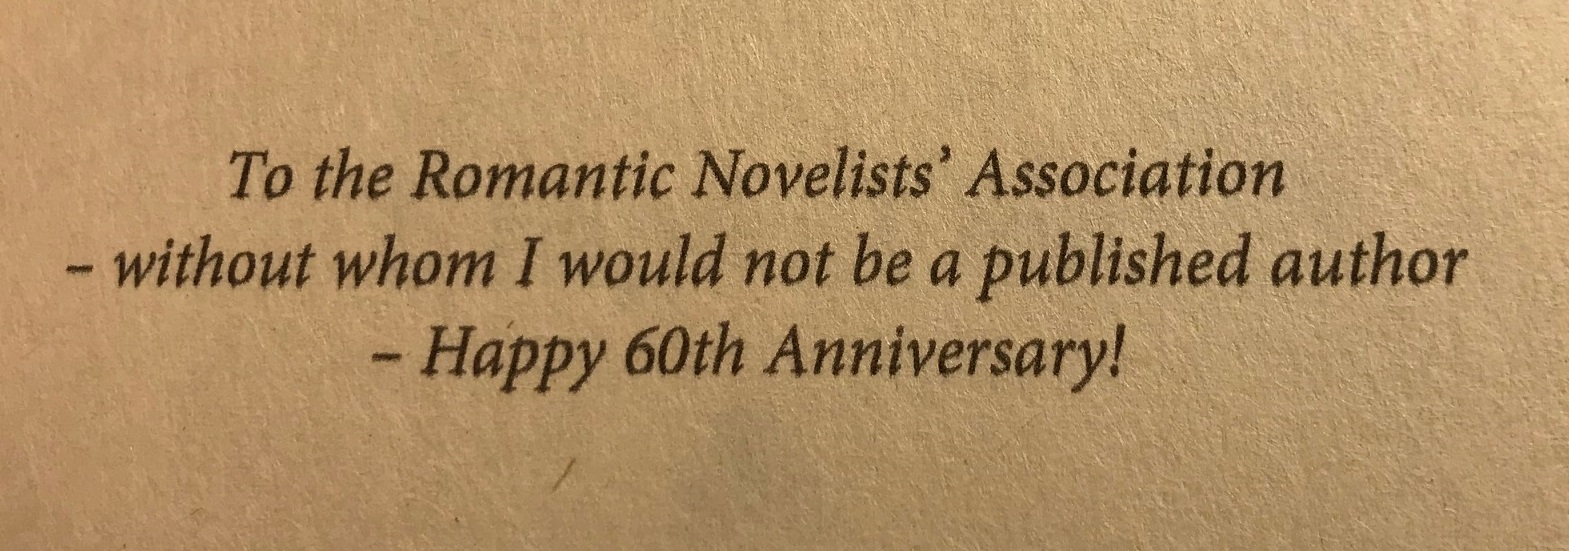 The the Romantic Novelists' Association - without whom I would not be a published author. Happy 60th Anniversary!